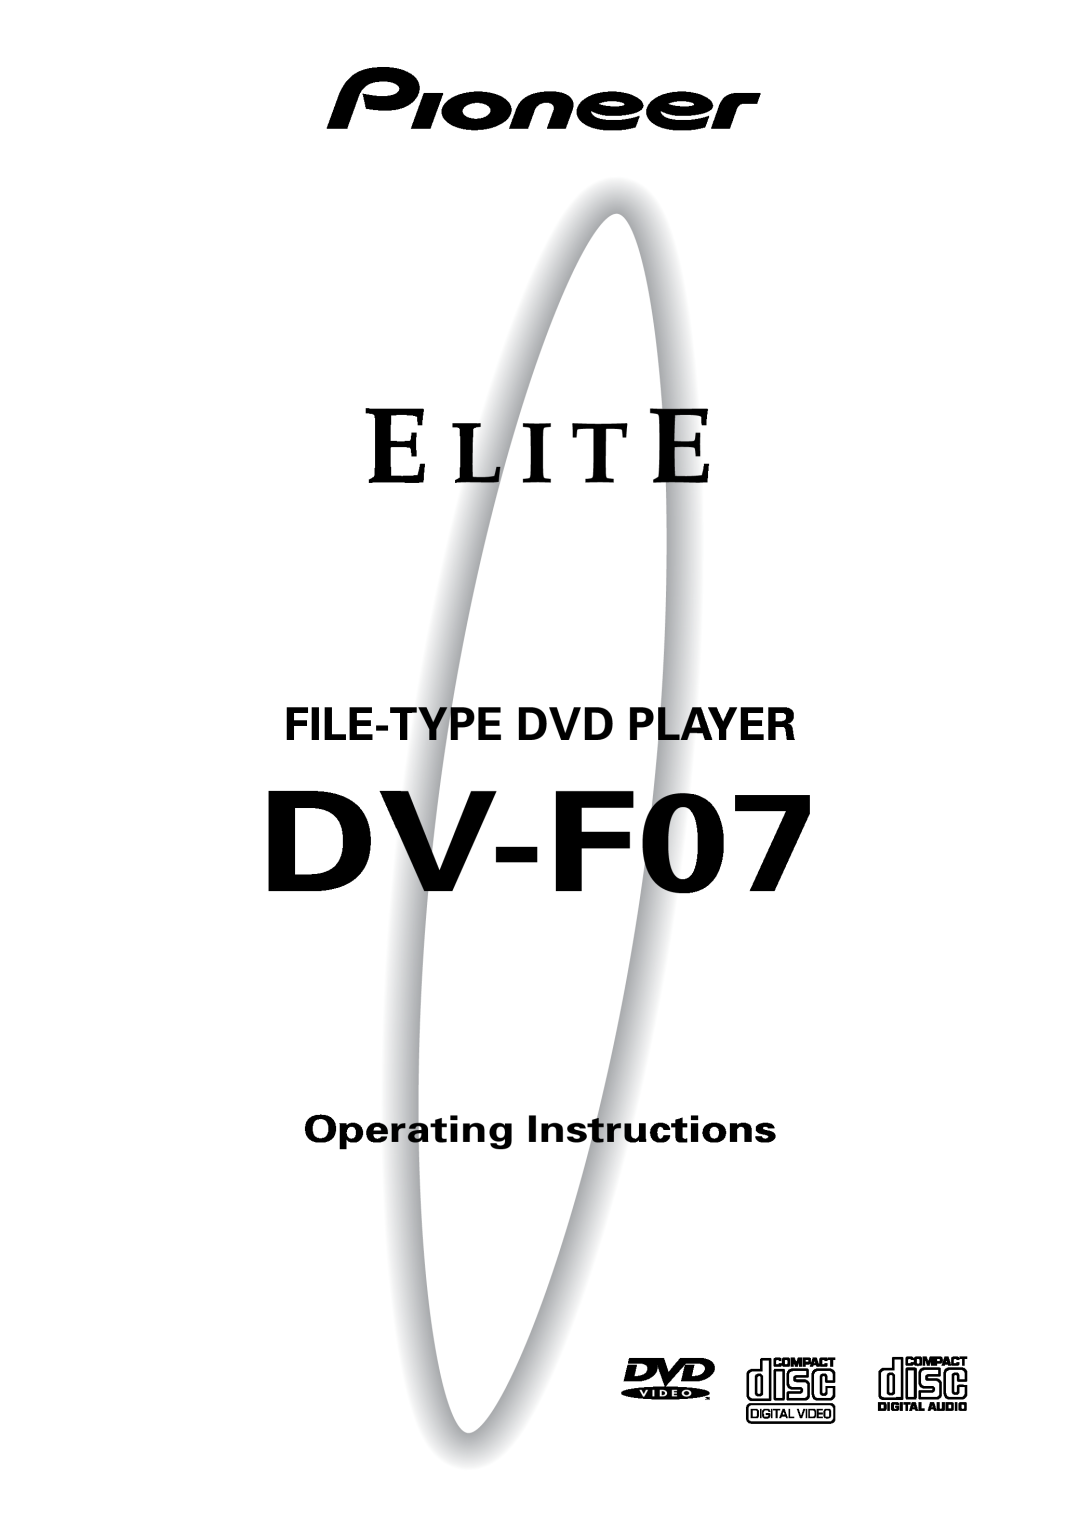 Pioneer DV-F07 operating instructions File-Type Dvd Player, Operating Instructions 